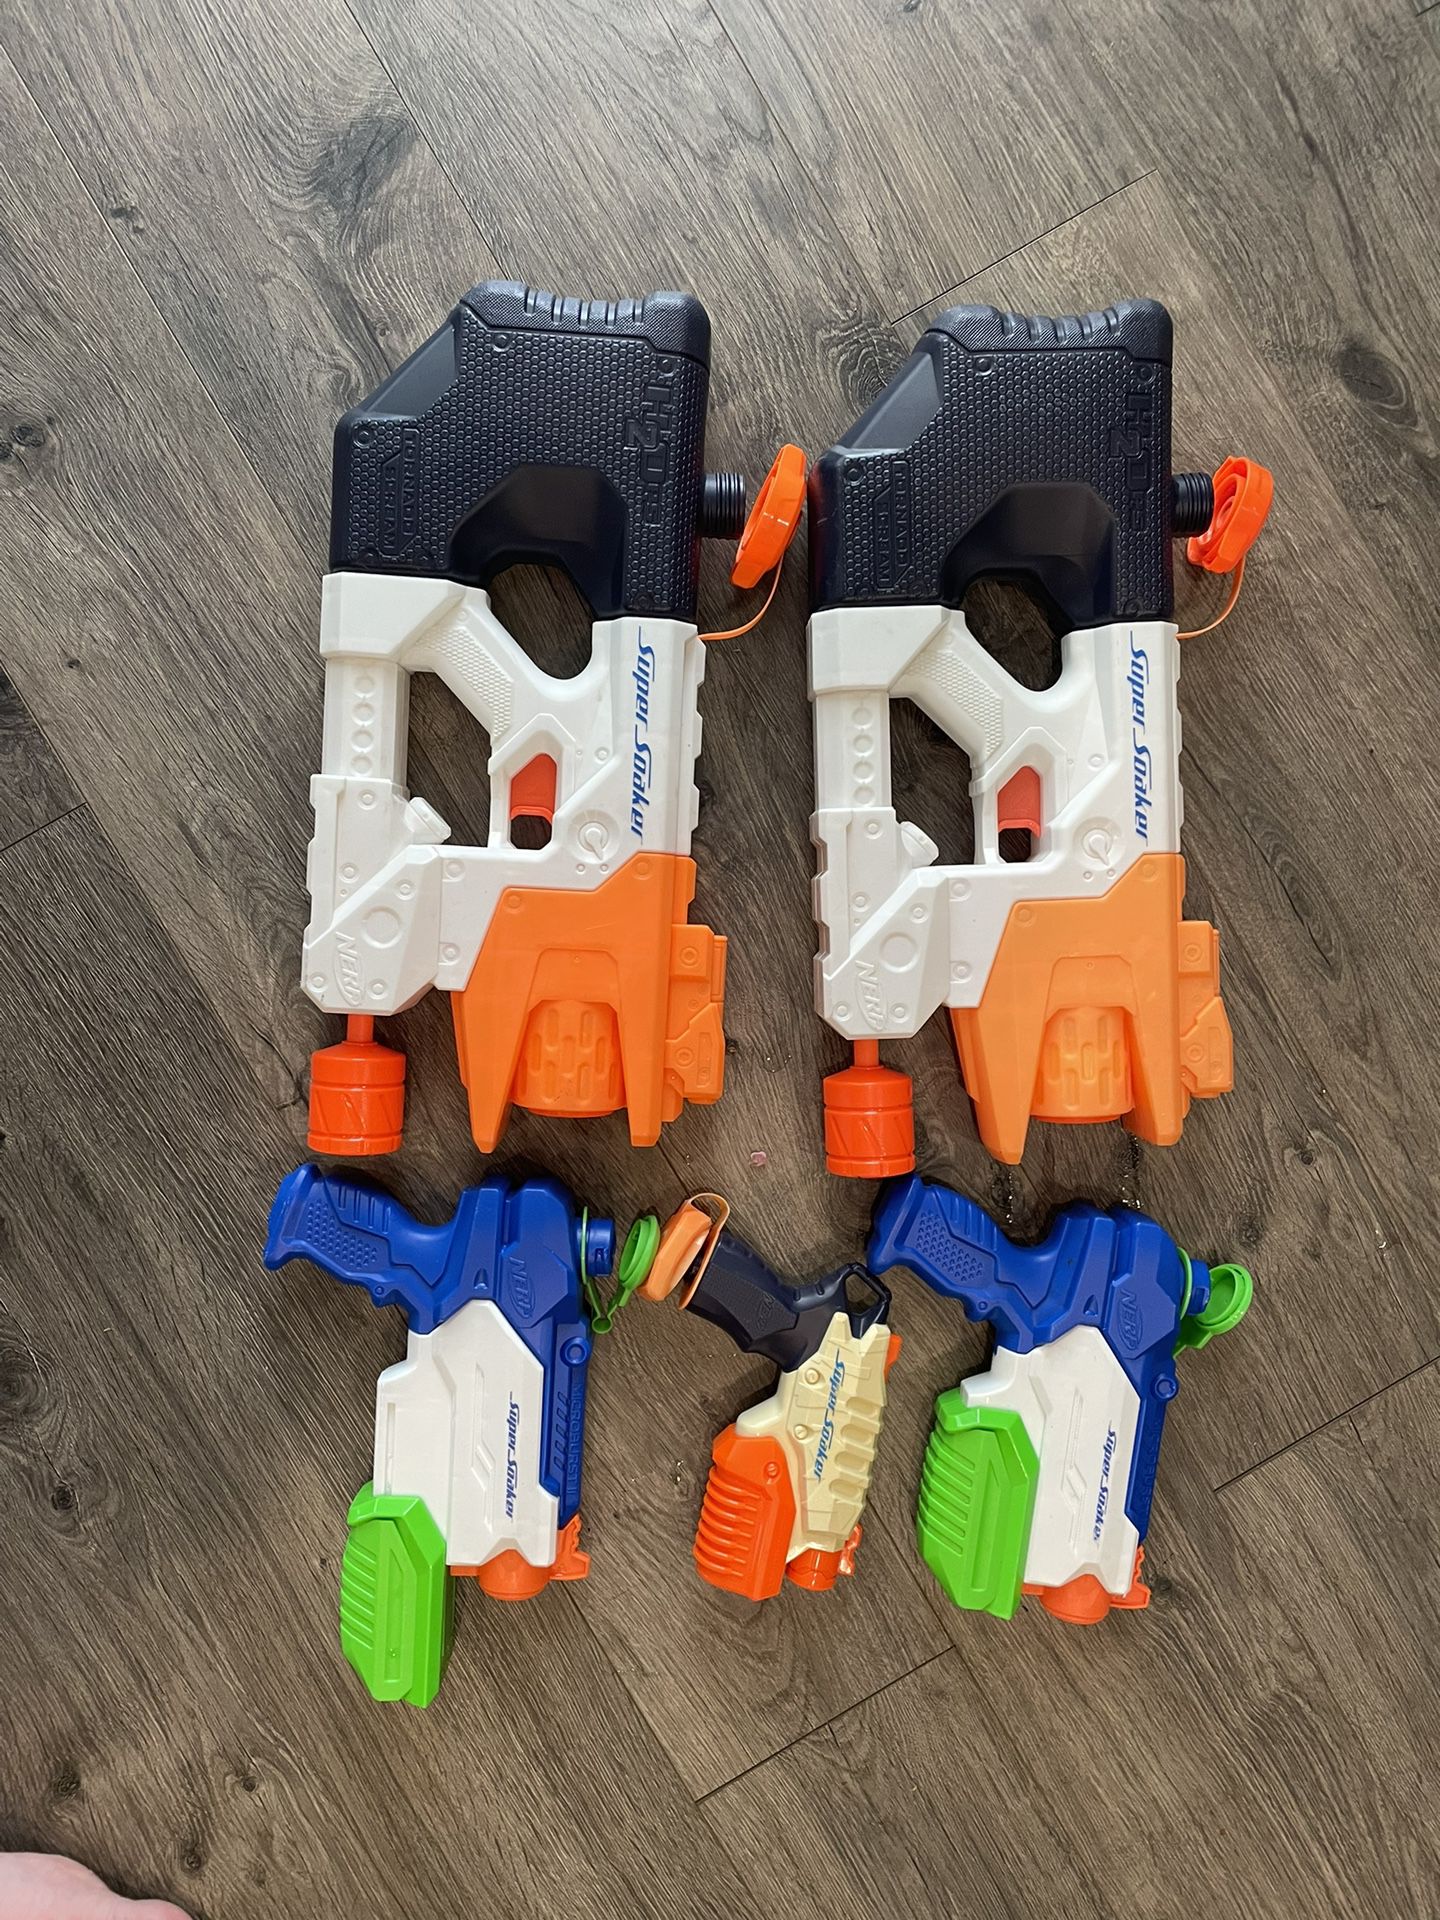 Nerf Gun Super soakers Qty5 All Tested